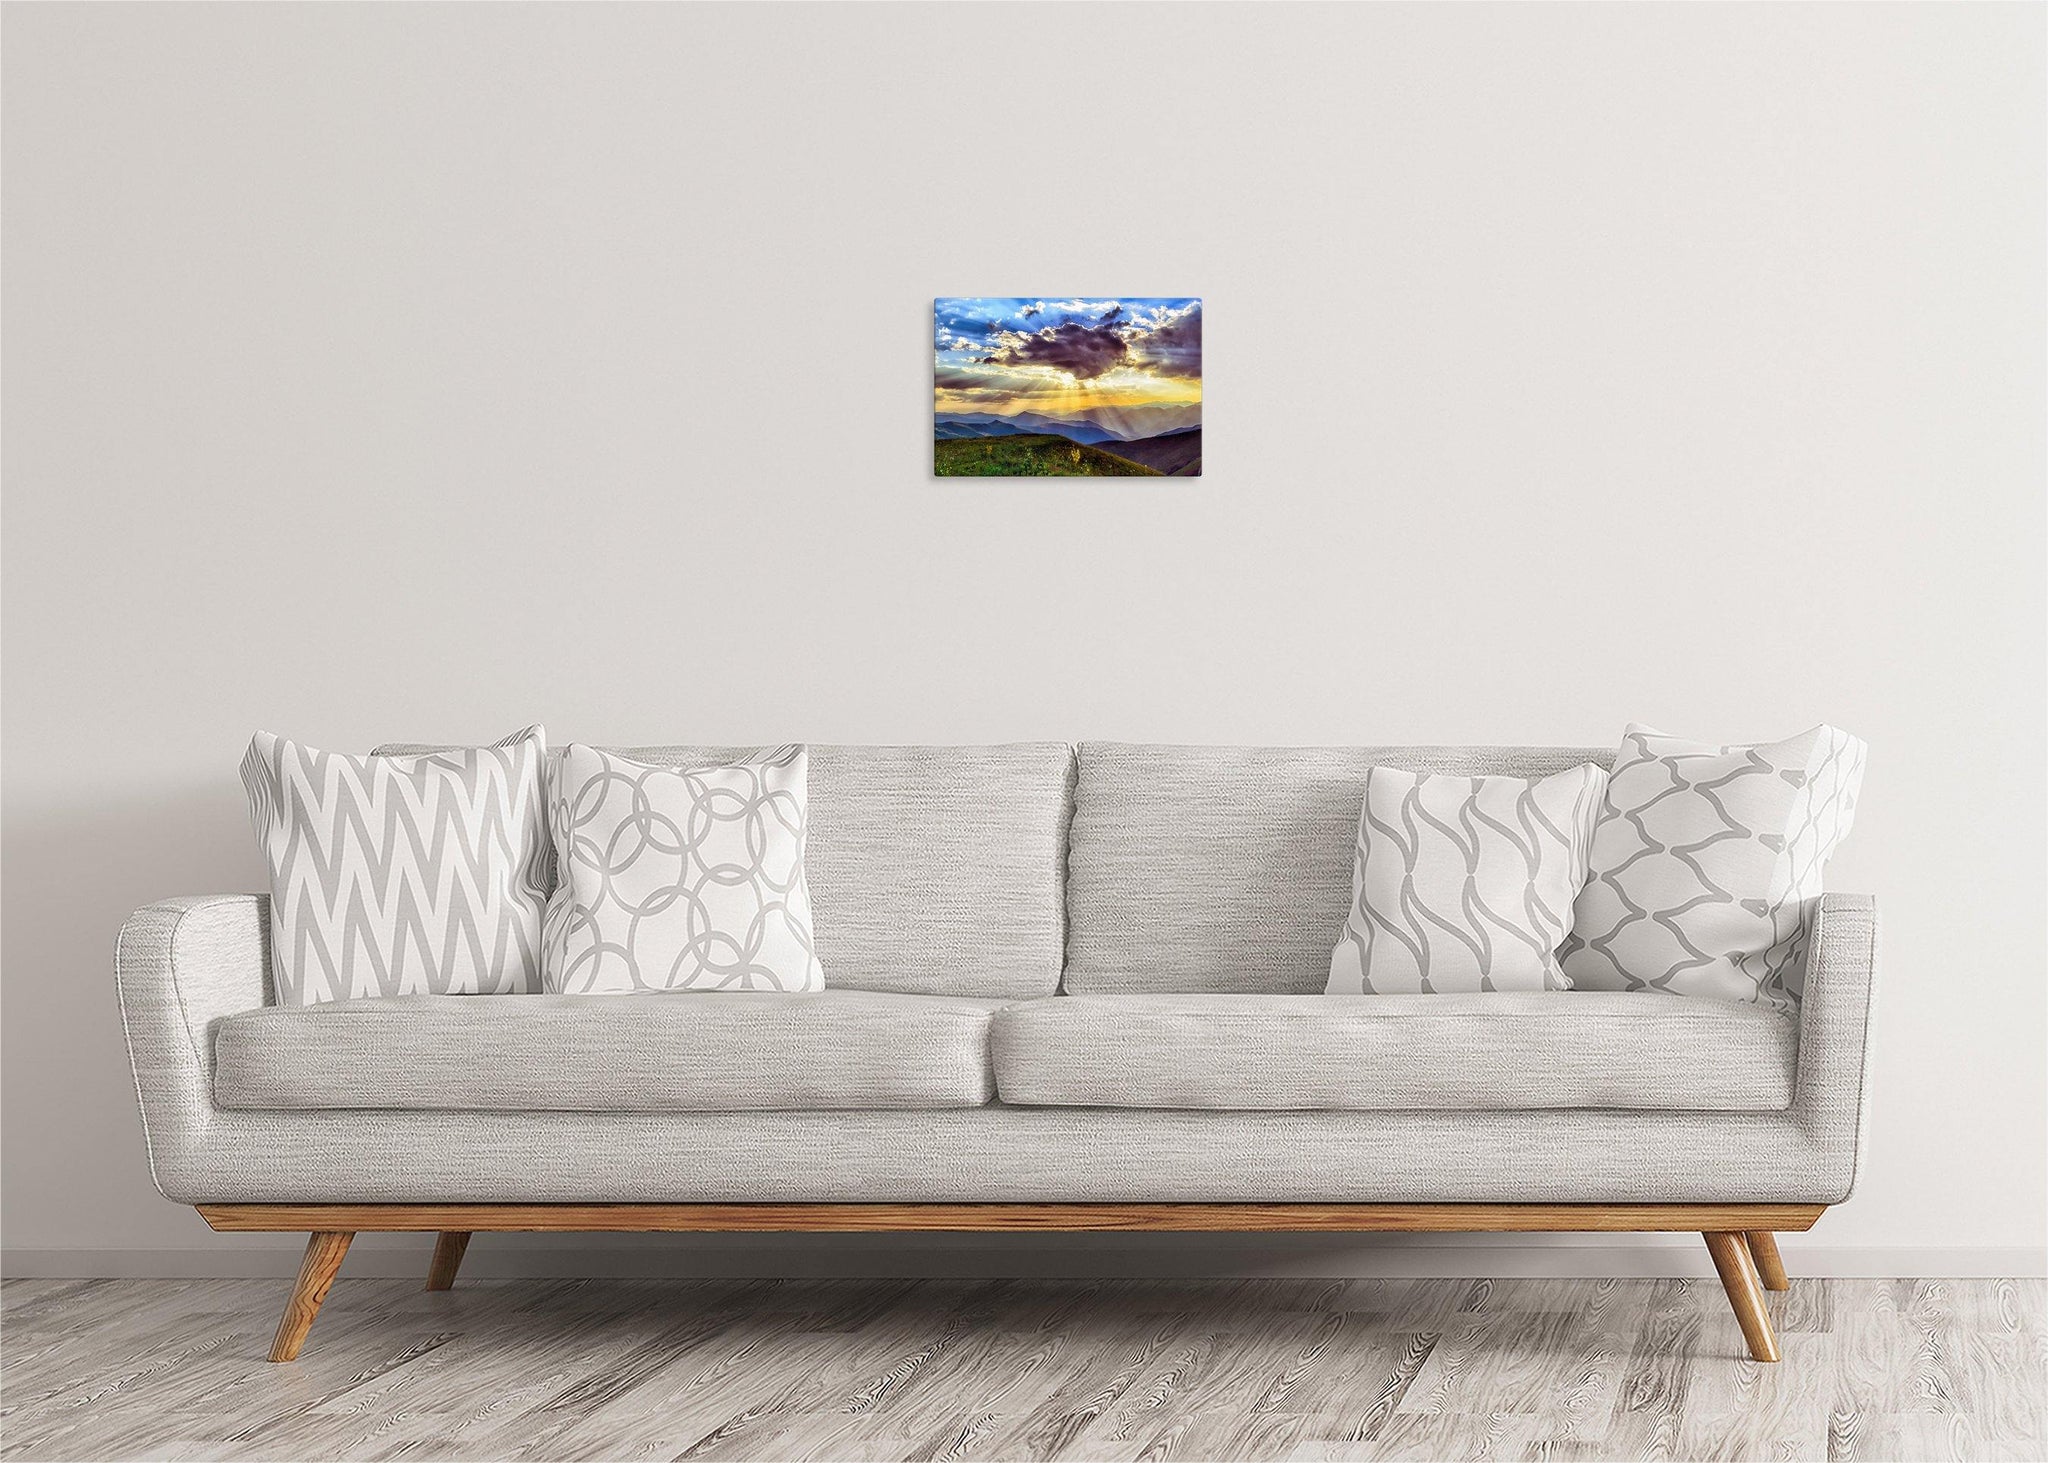 Sun Rays Over Mountains Gallery Wrap Canvas - Orb.co